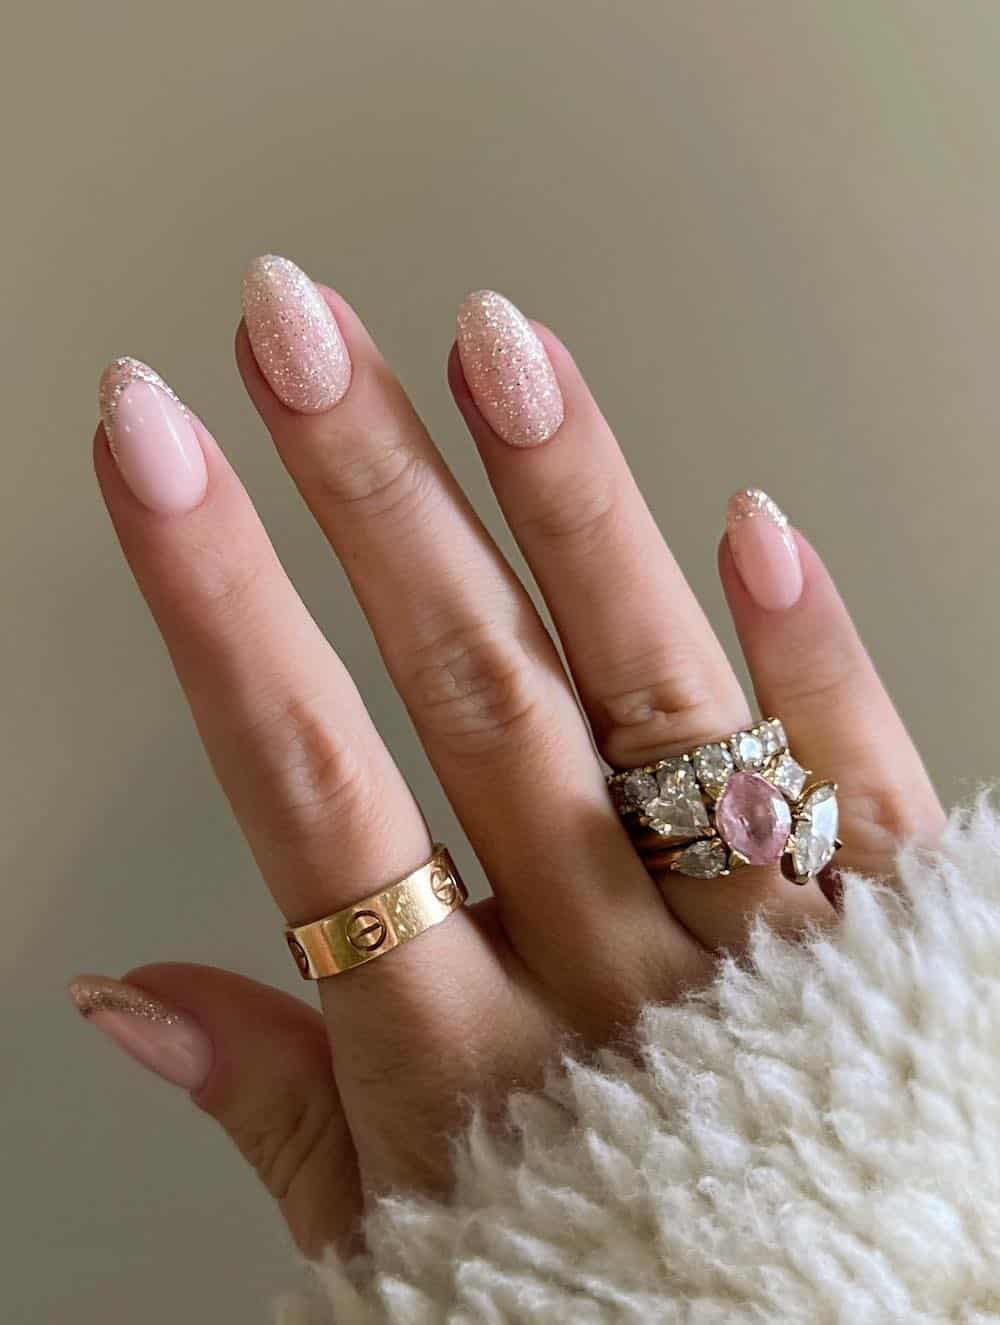 A hand with short round nails painted with solid nails and French tips with gold glitter nail polish